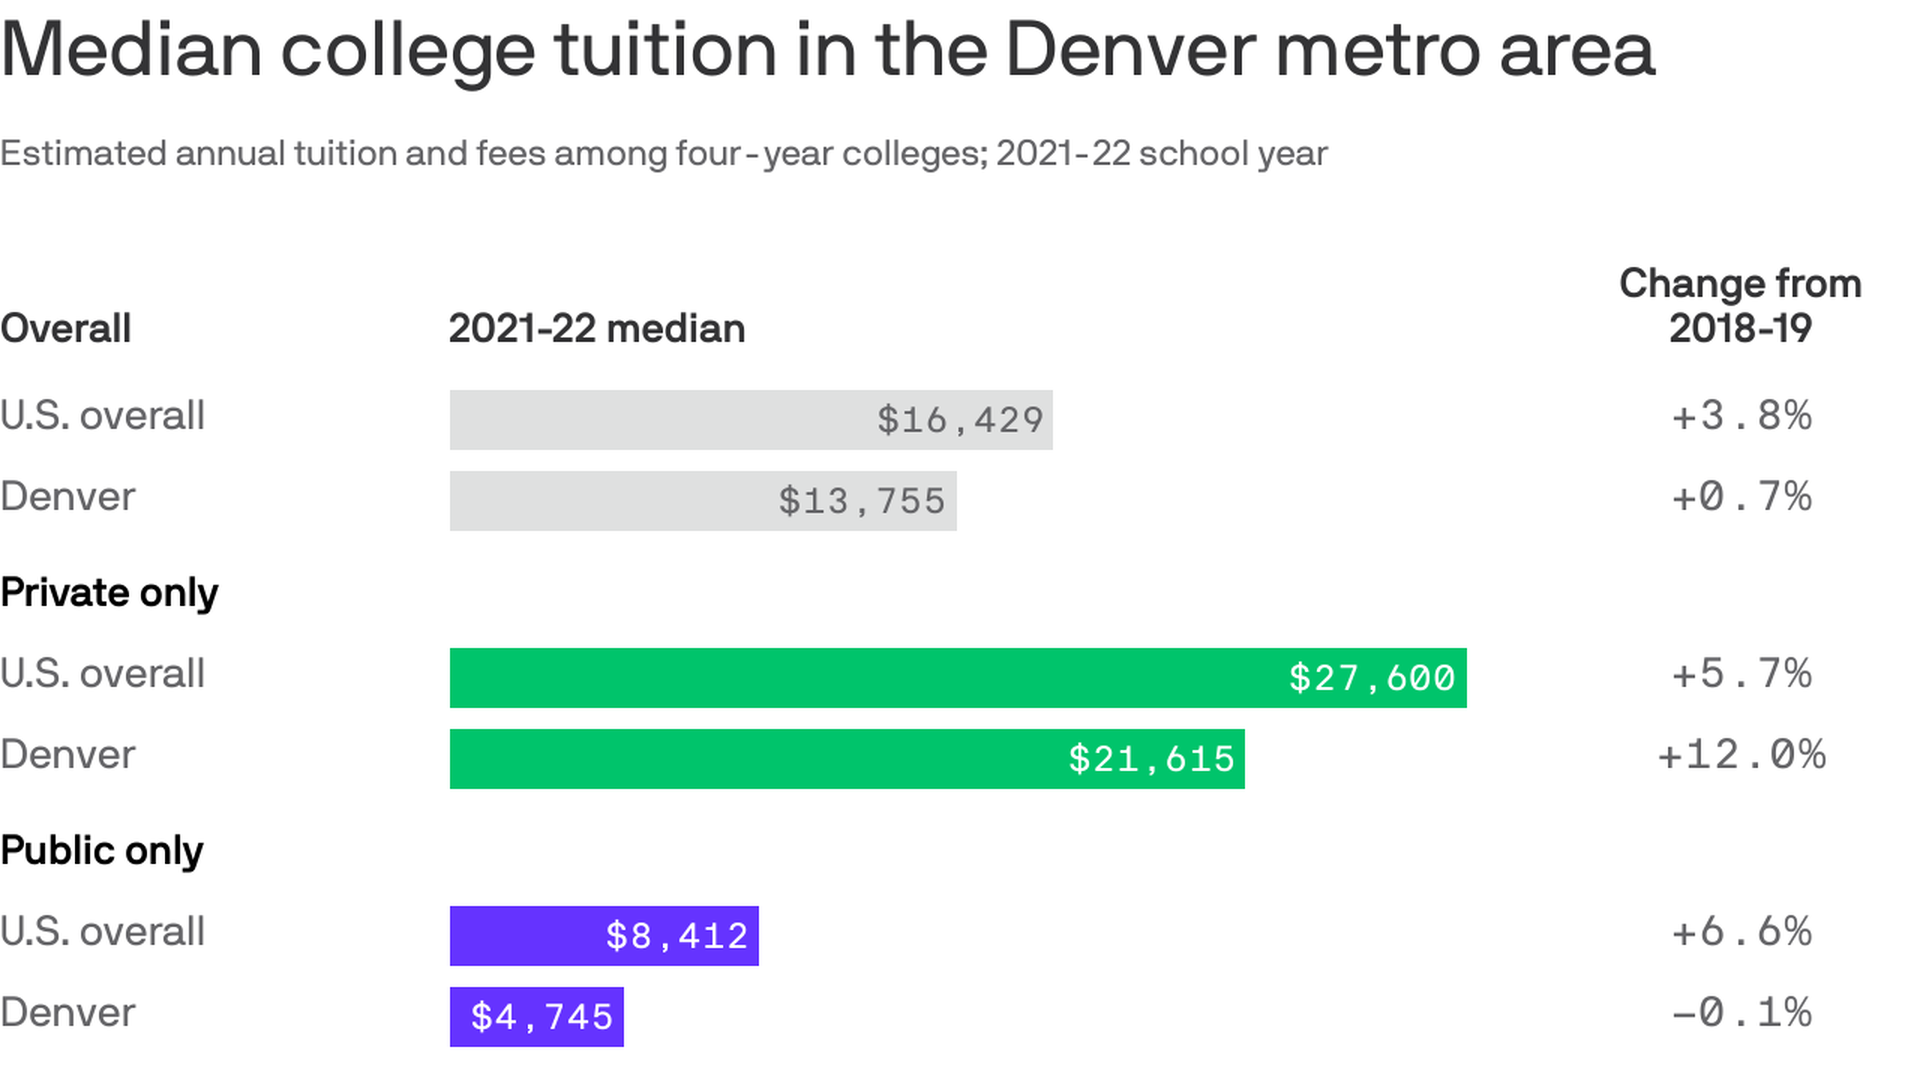 Estimated annual tuition and fees among four-year colleges; 2021-22 school year